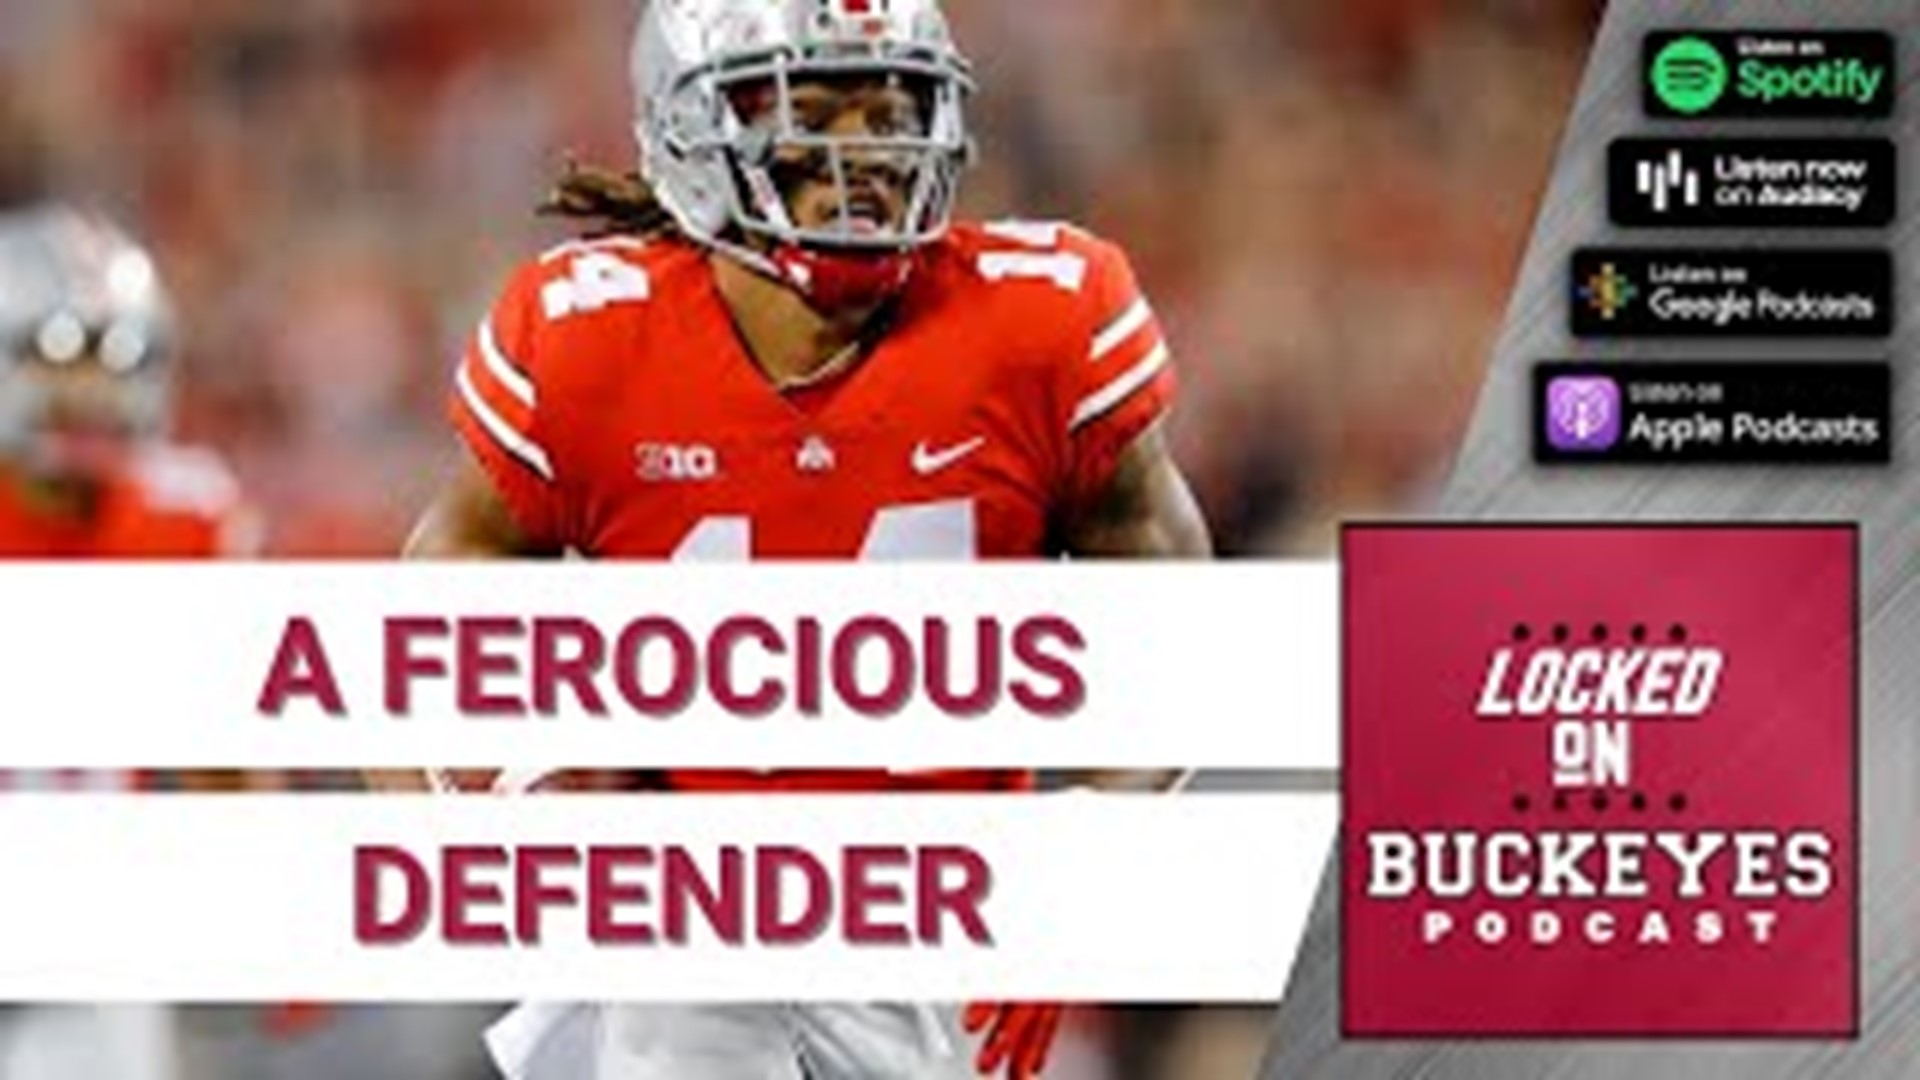 Hear what an NFL Draft analyst has to say about Buckeyes defensive back Ronnie Hickman.